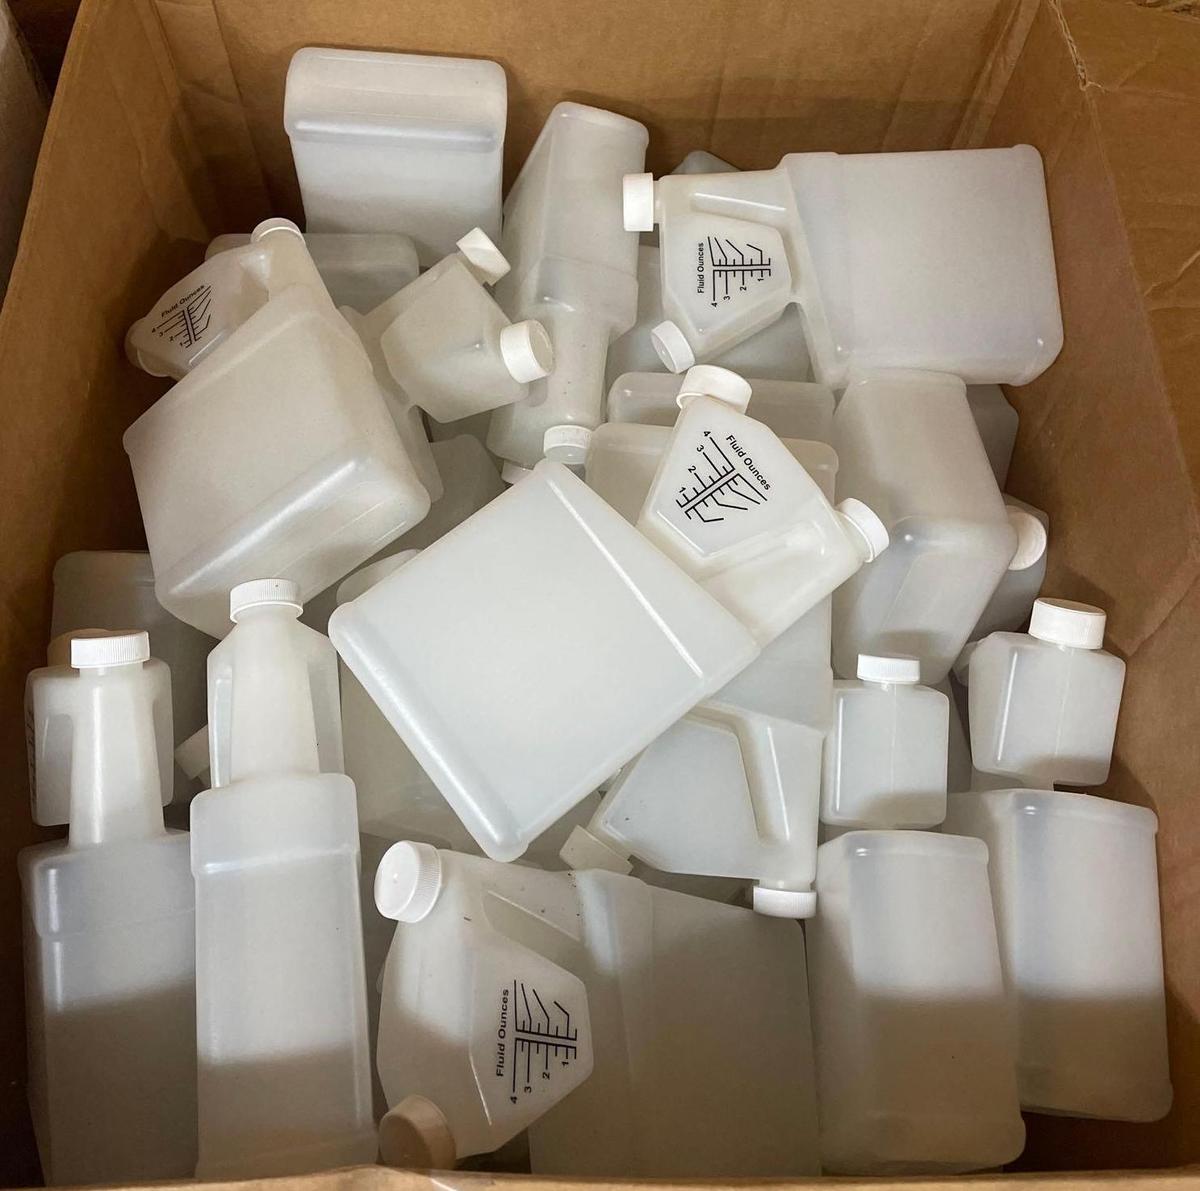 B1 R1- (1) Box of Plastic Measuring Containers For Liquids/Chemicals